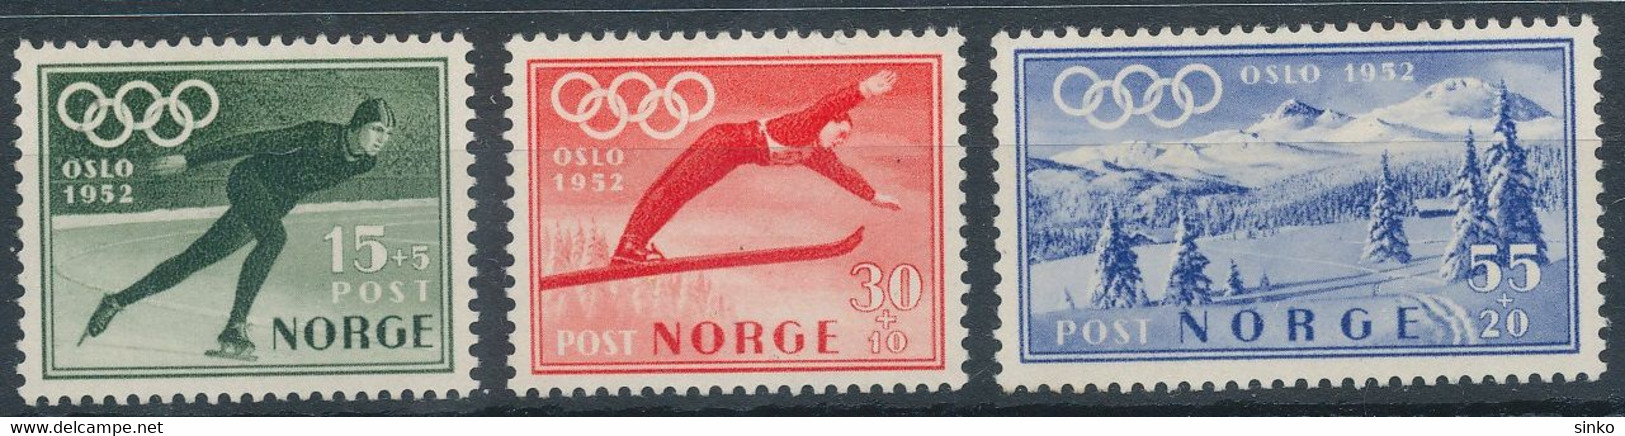 1952. Norway - Olympic Games - Winter 1952: Oslo